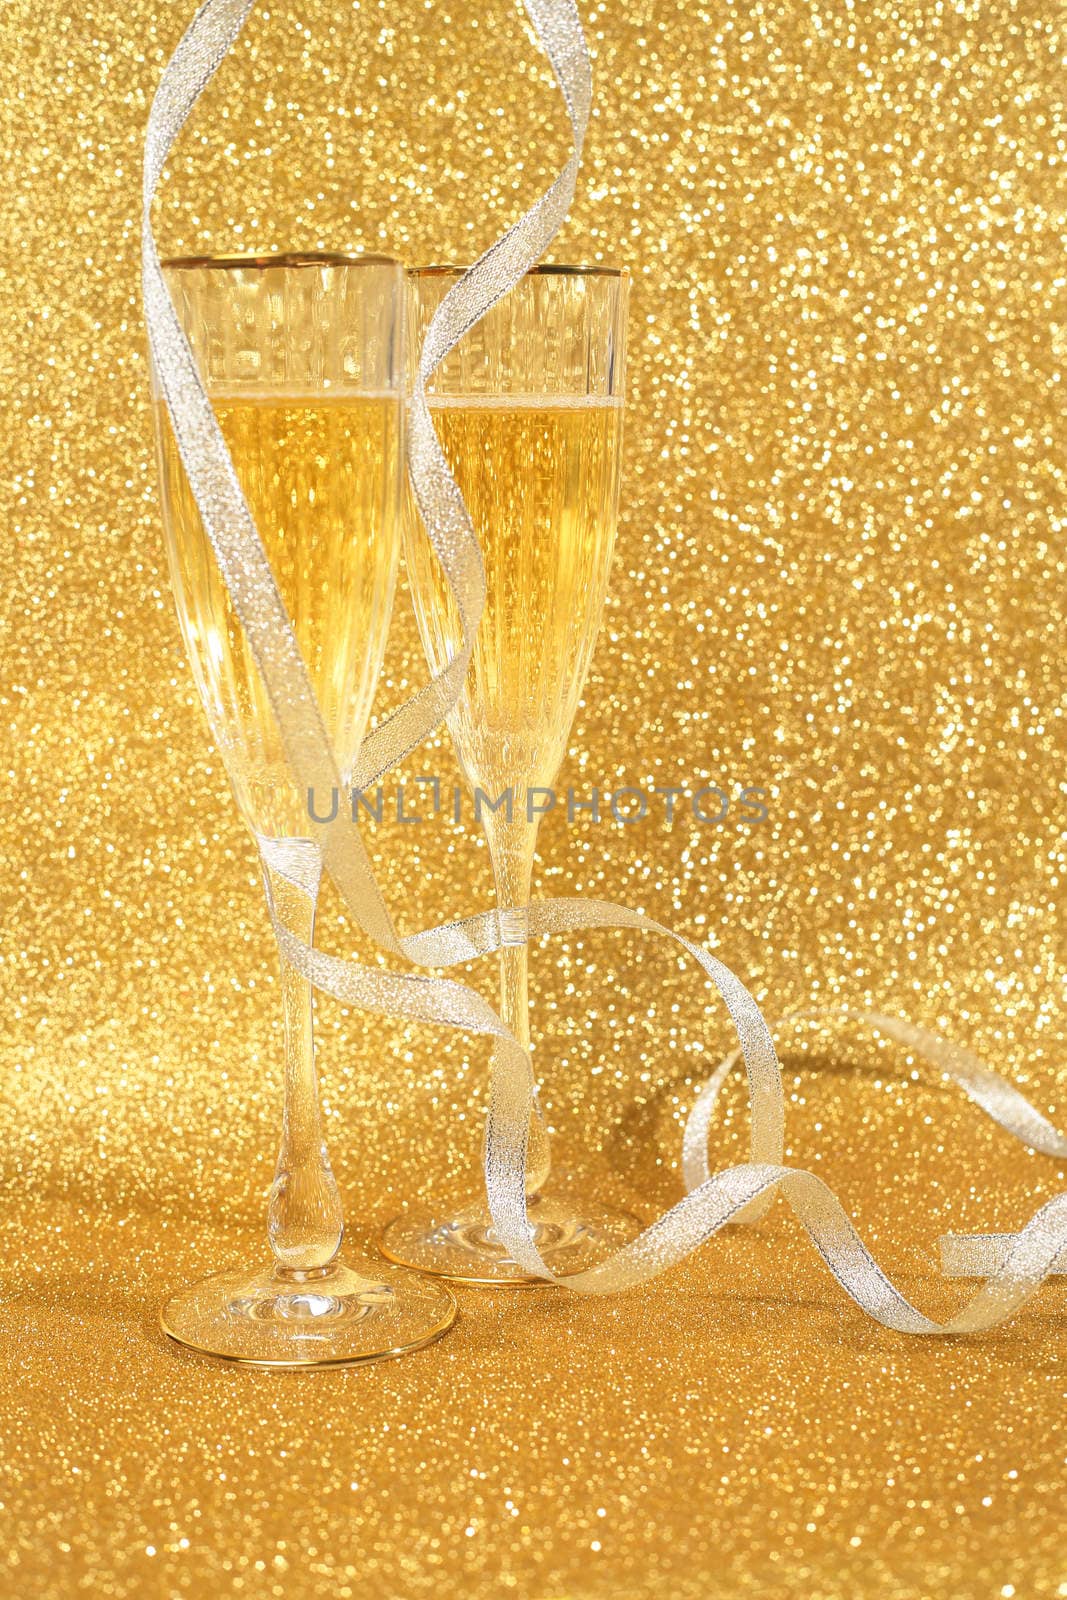 Two glasses of champagne with golden glitter lights on background